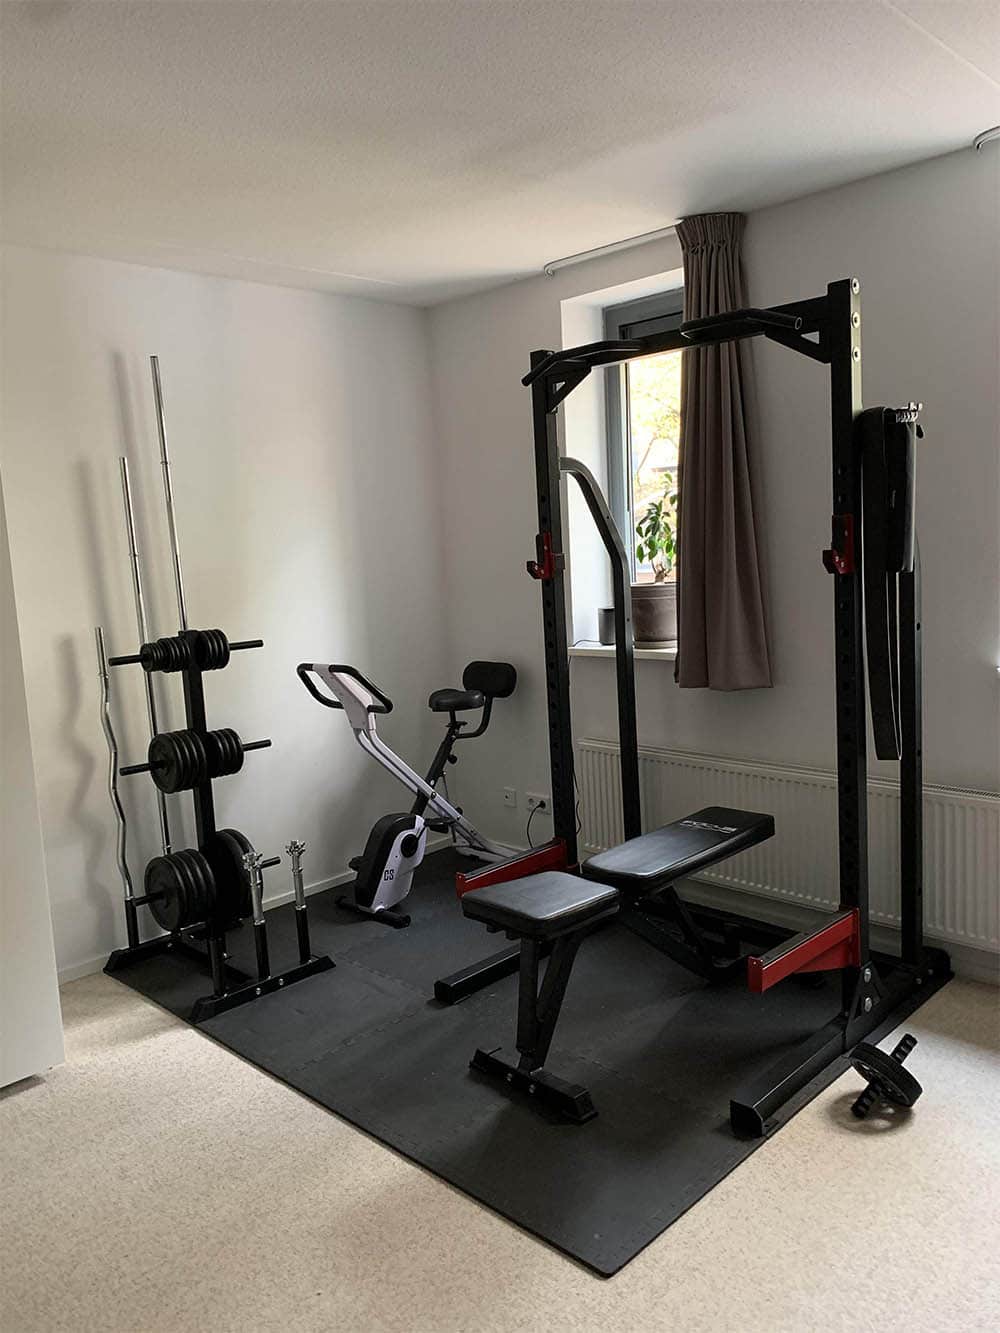 small home gym in the corner of the room with a squat rack and exercise bike